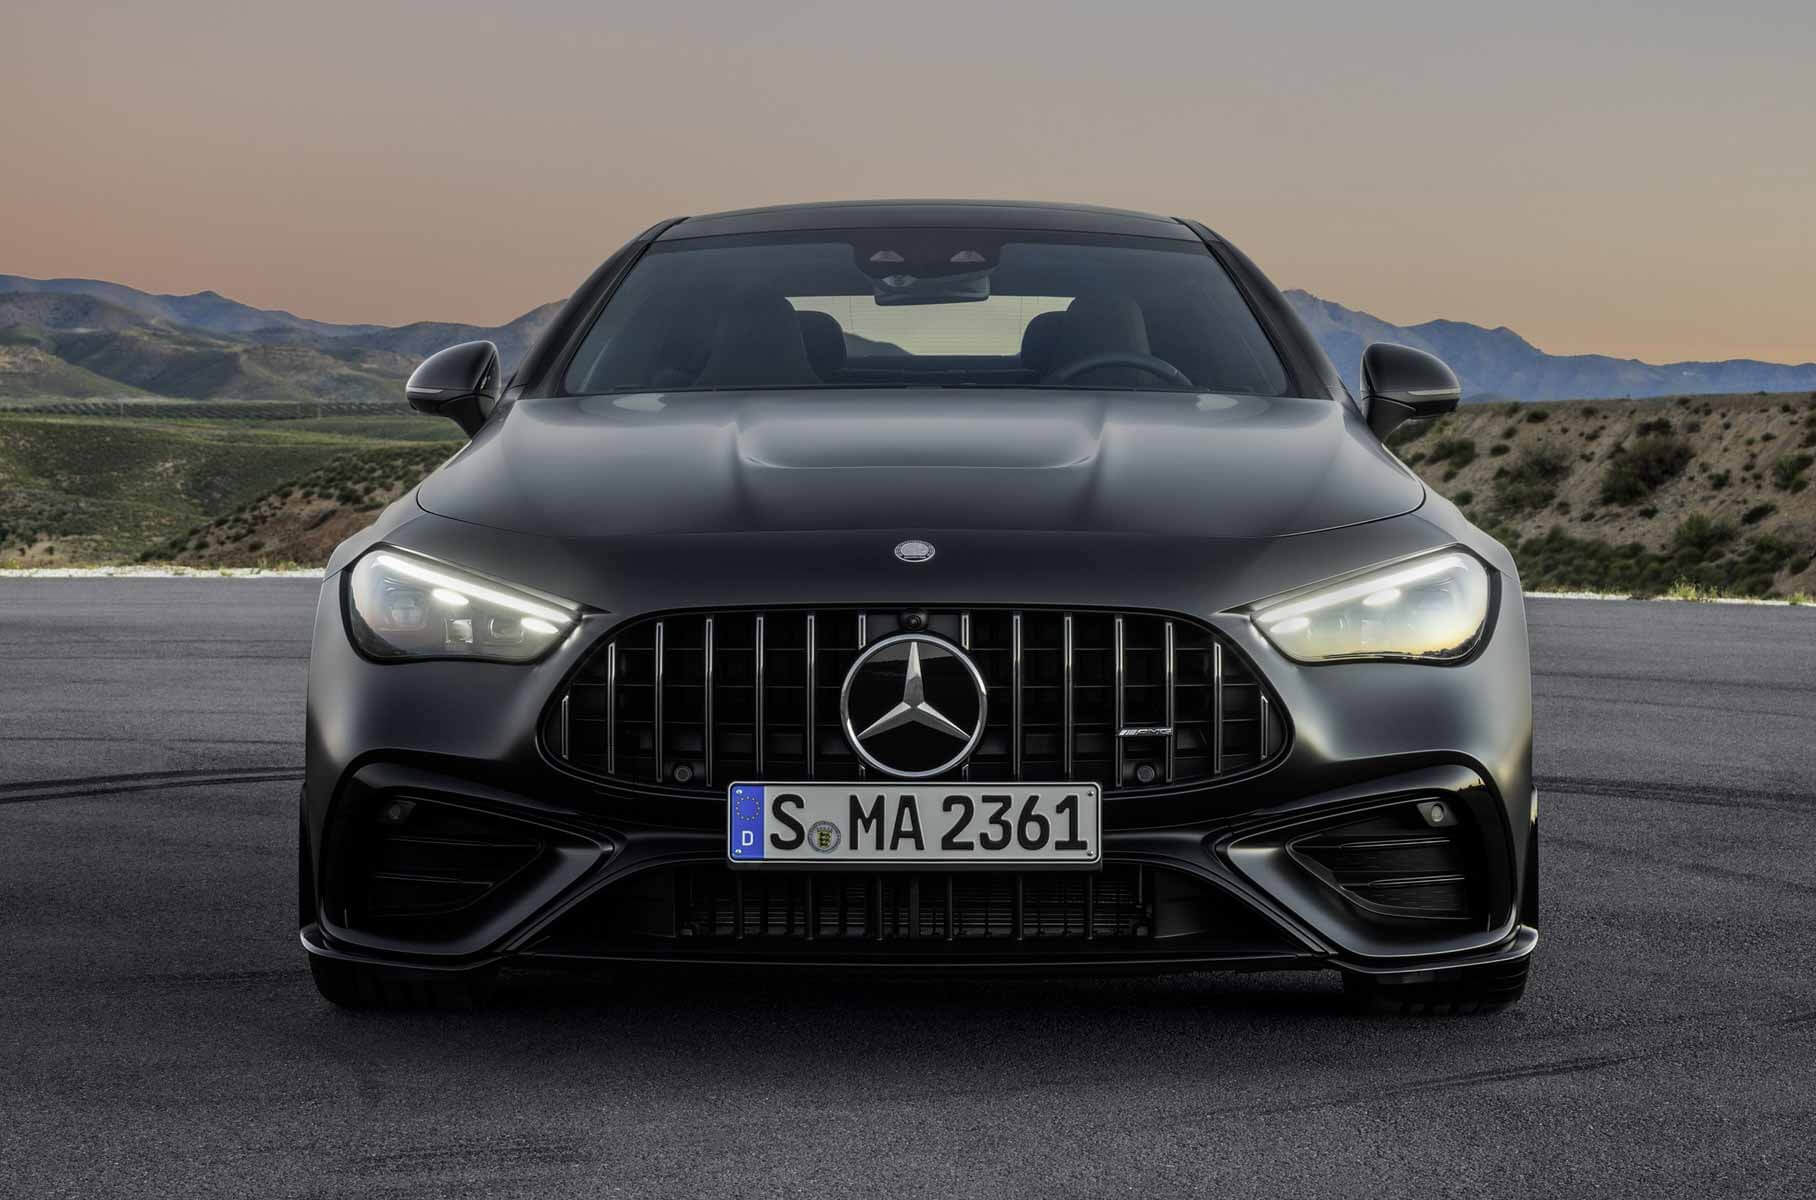 The new Mercedes-Benz CLE received the first AMG version